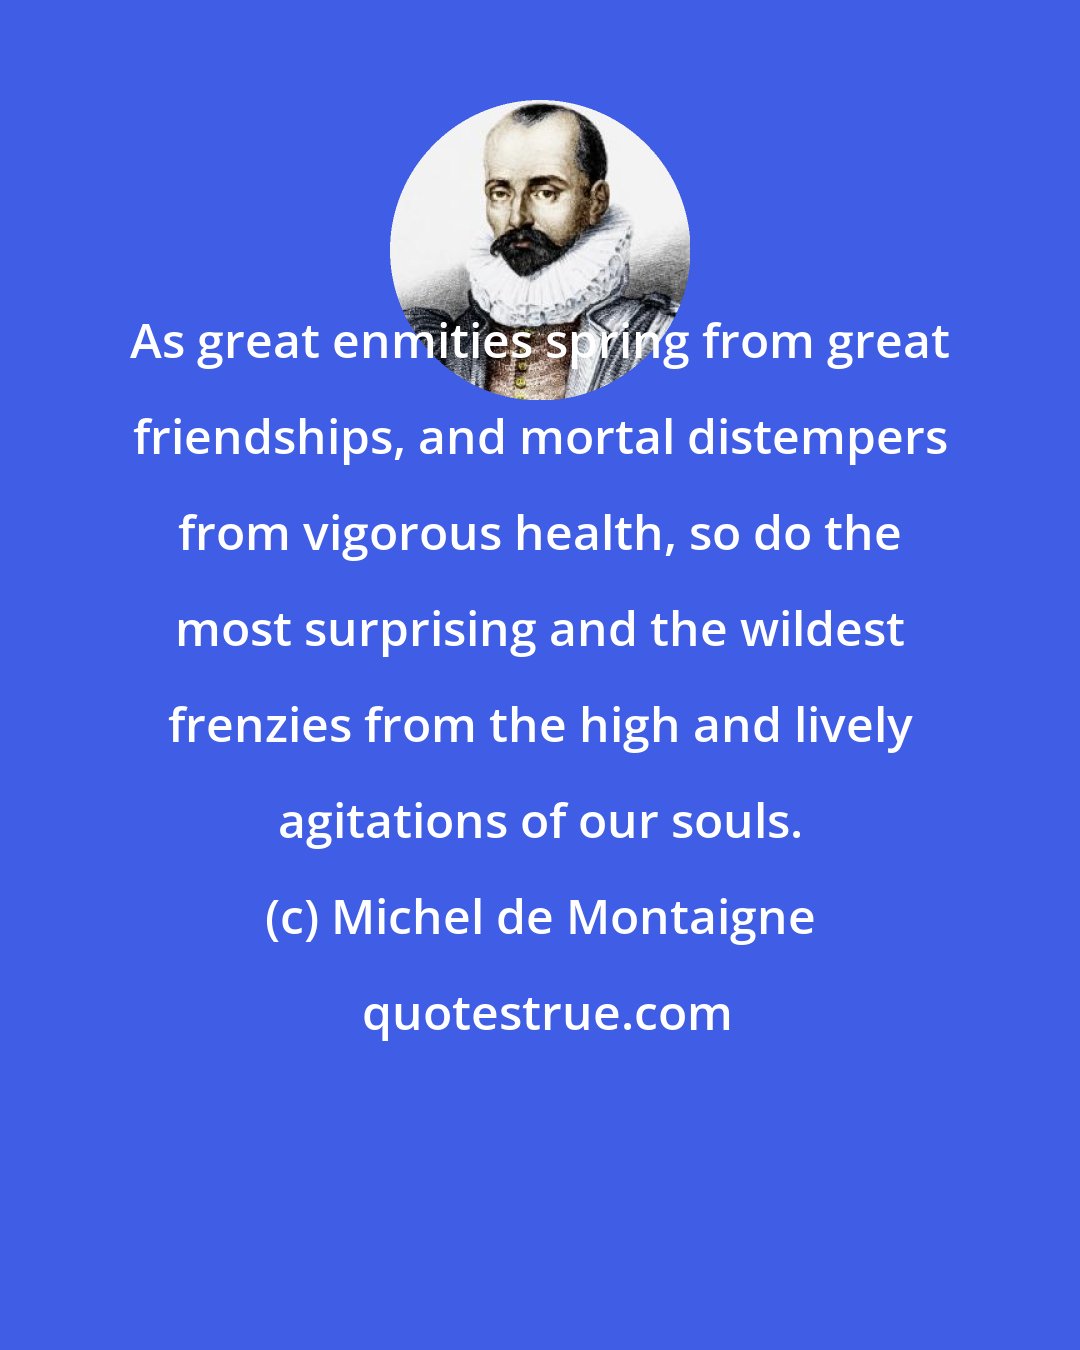 Michel de Montaigne: As great enmities spring from great friendships, and mortal distempers from vigorous health, so do the most surprising and the wildest frenzies from the high and lively agitations of our souls.